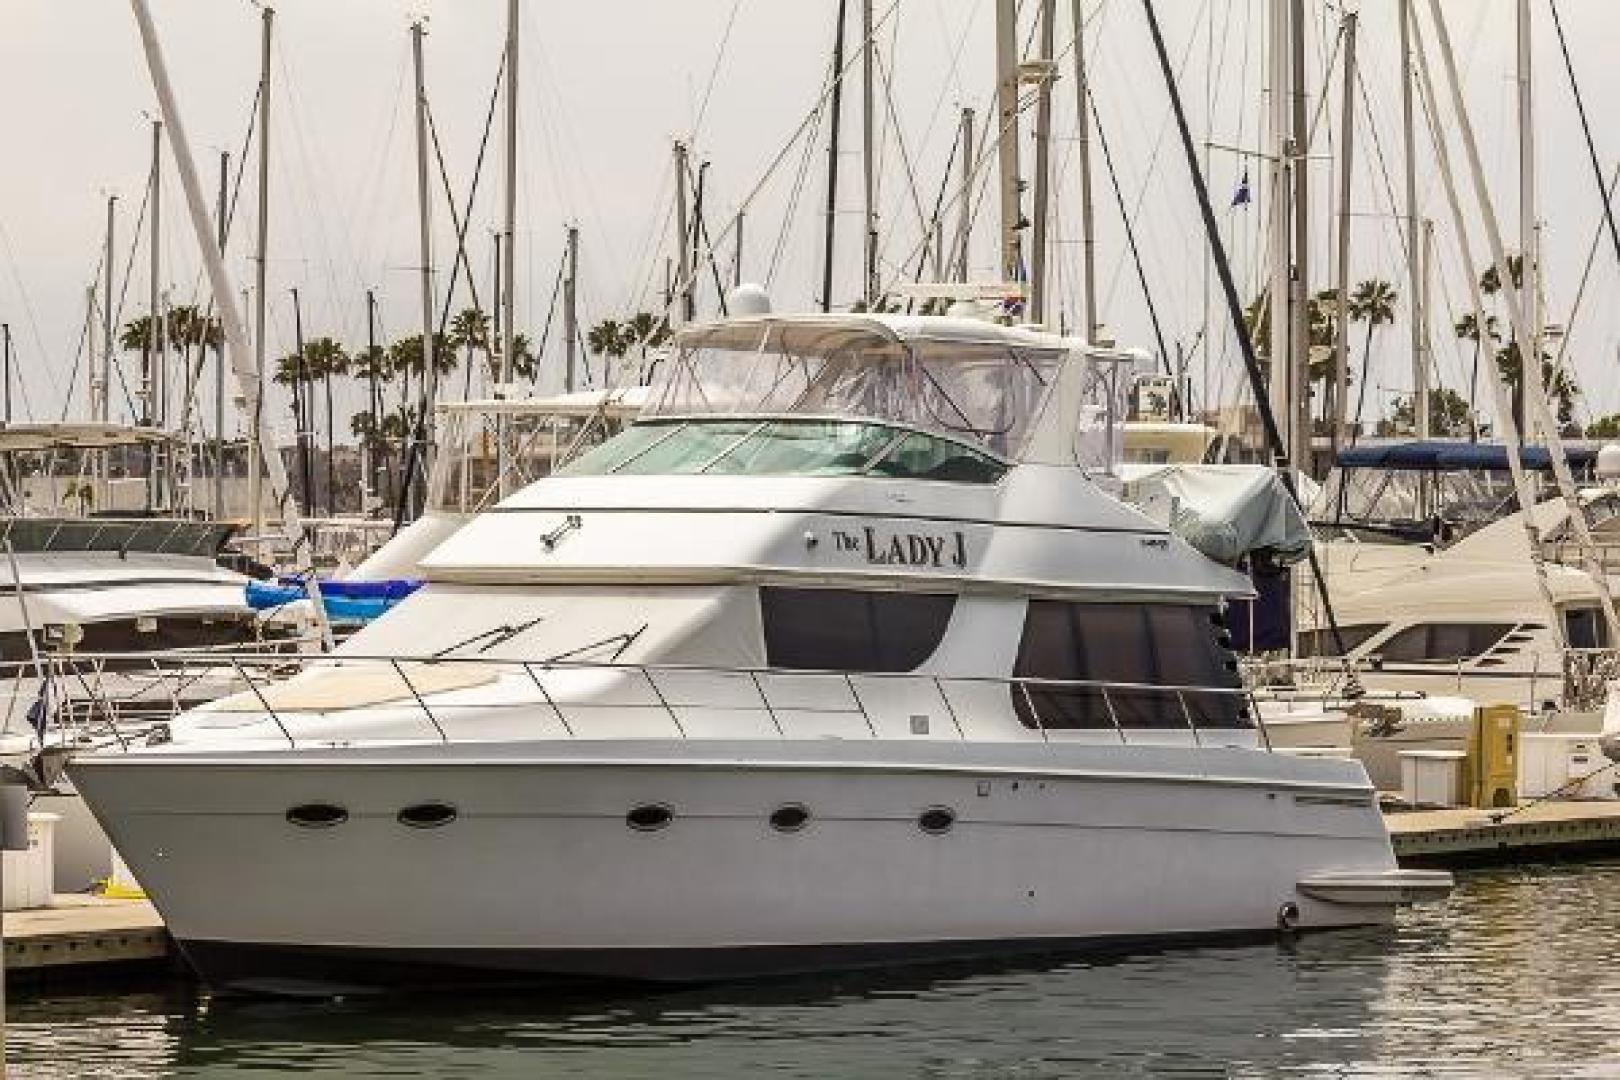 53' Carver 530 Voyager Pilothouse